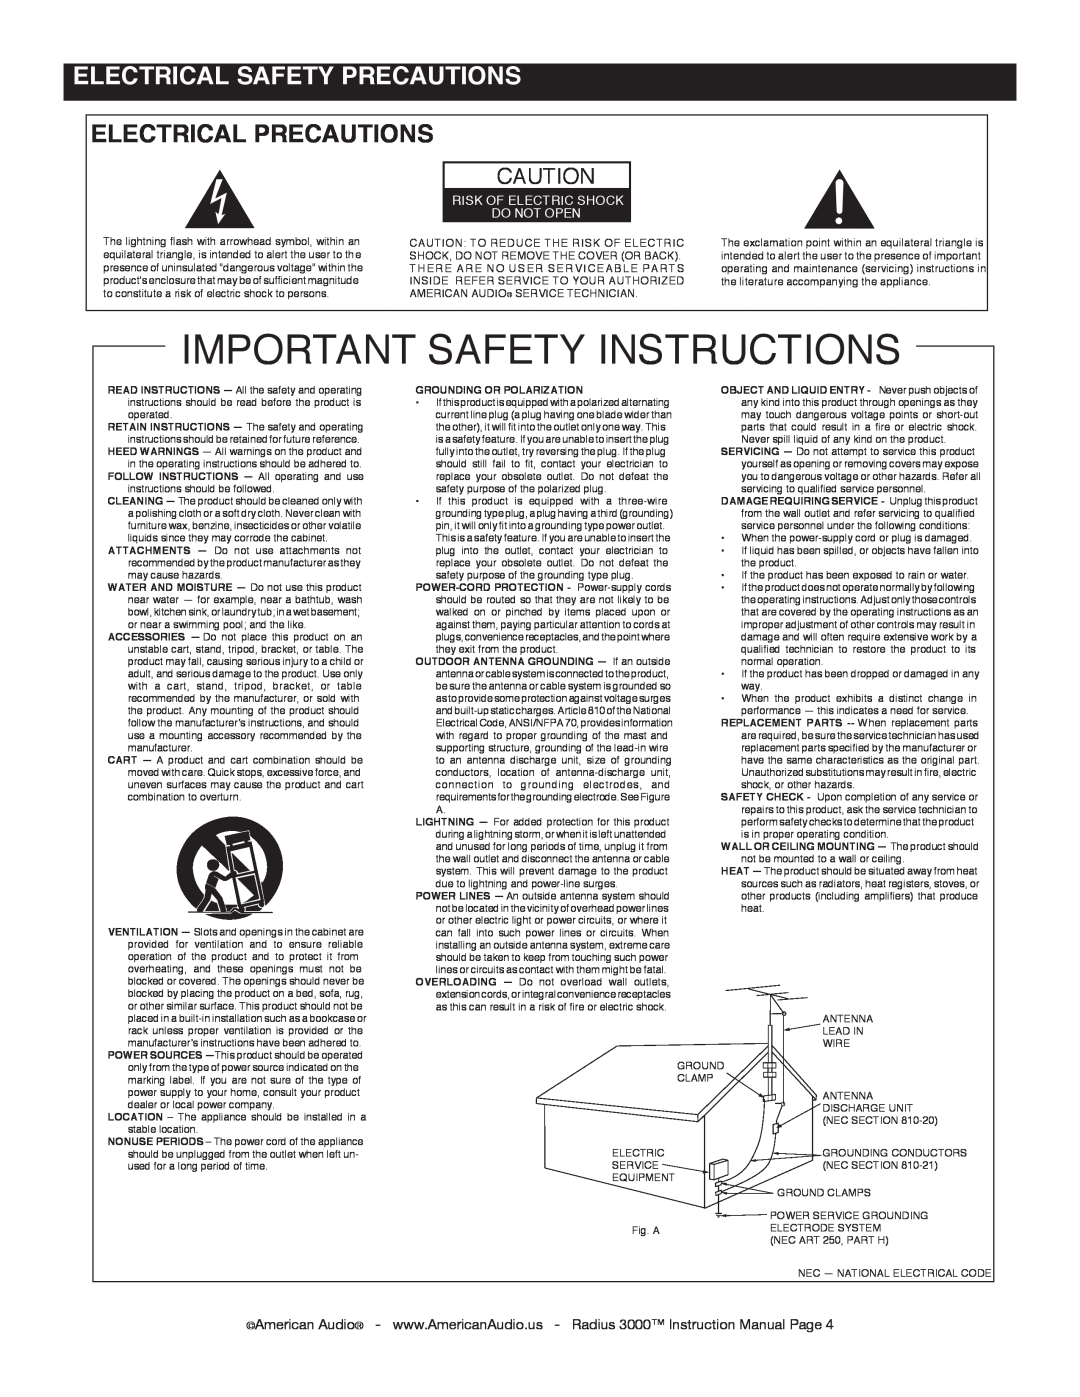 American Audio Radius 3000 manual Electrical Safety Precautions, Electrical Precautions, Important Safety Instructions 